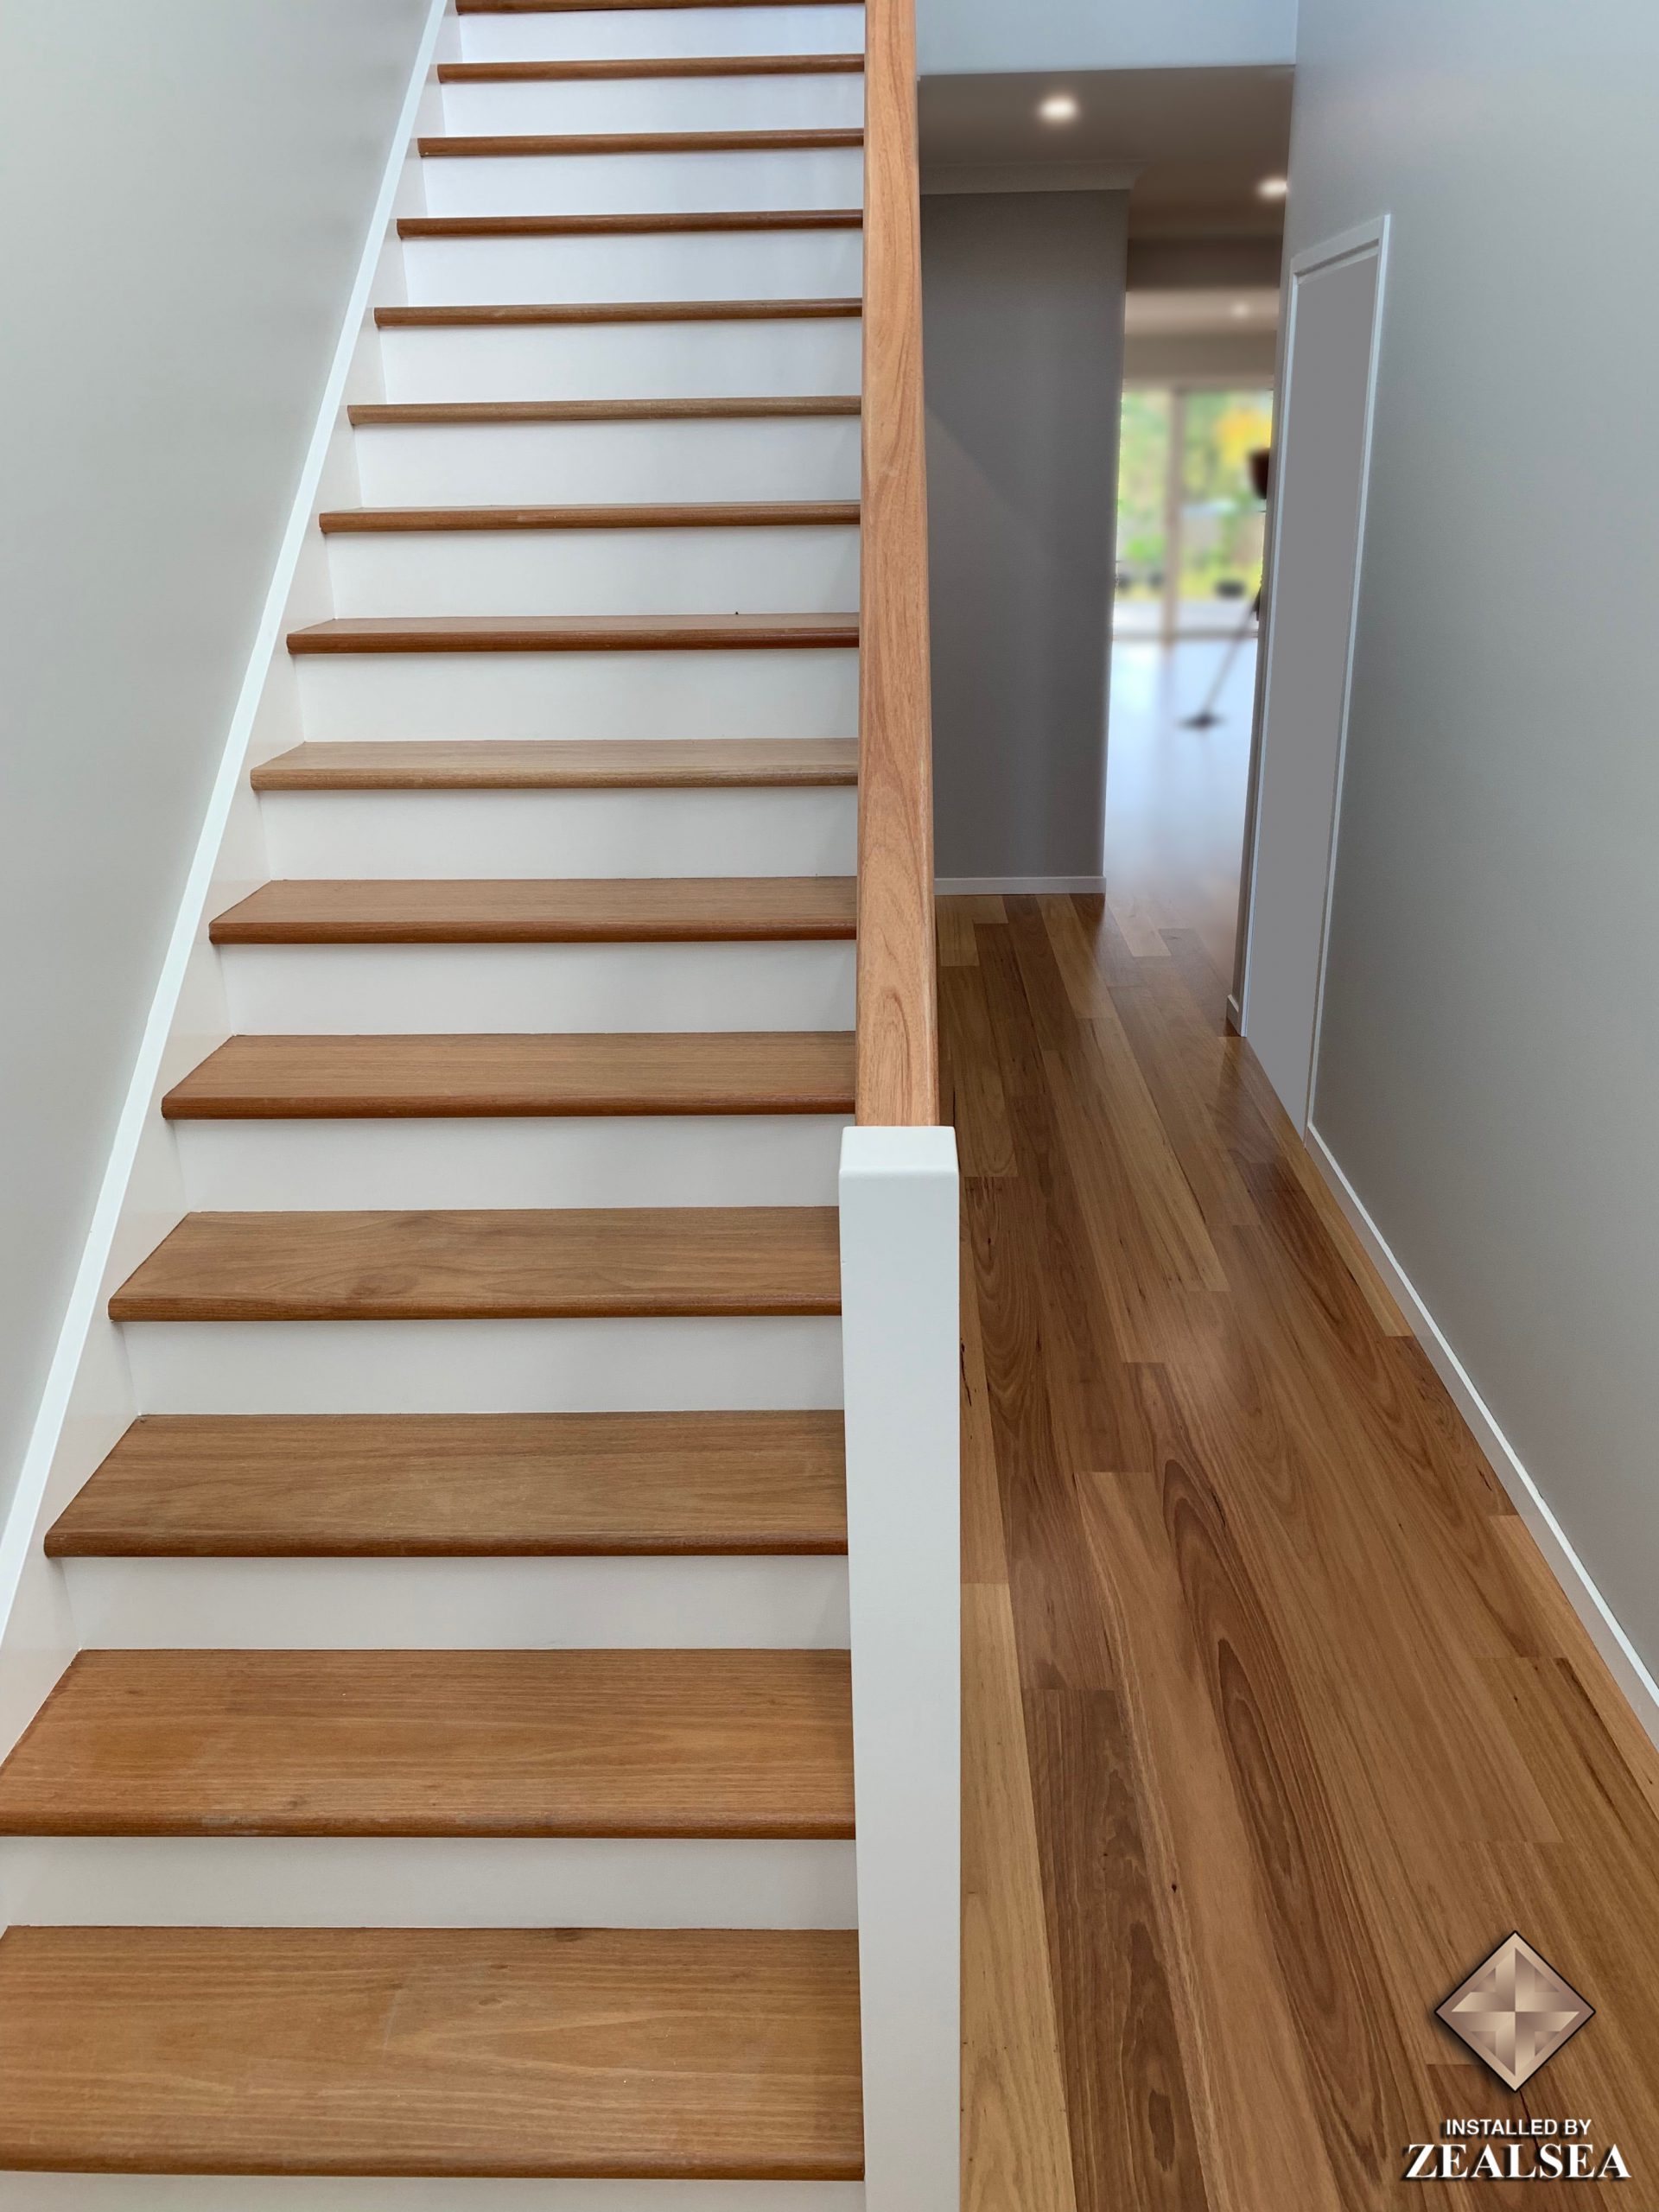 zealsea timber flooring professional installation oxley boral blackbutt 1 scaled